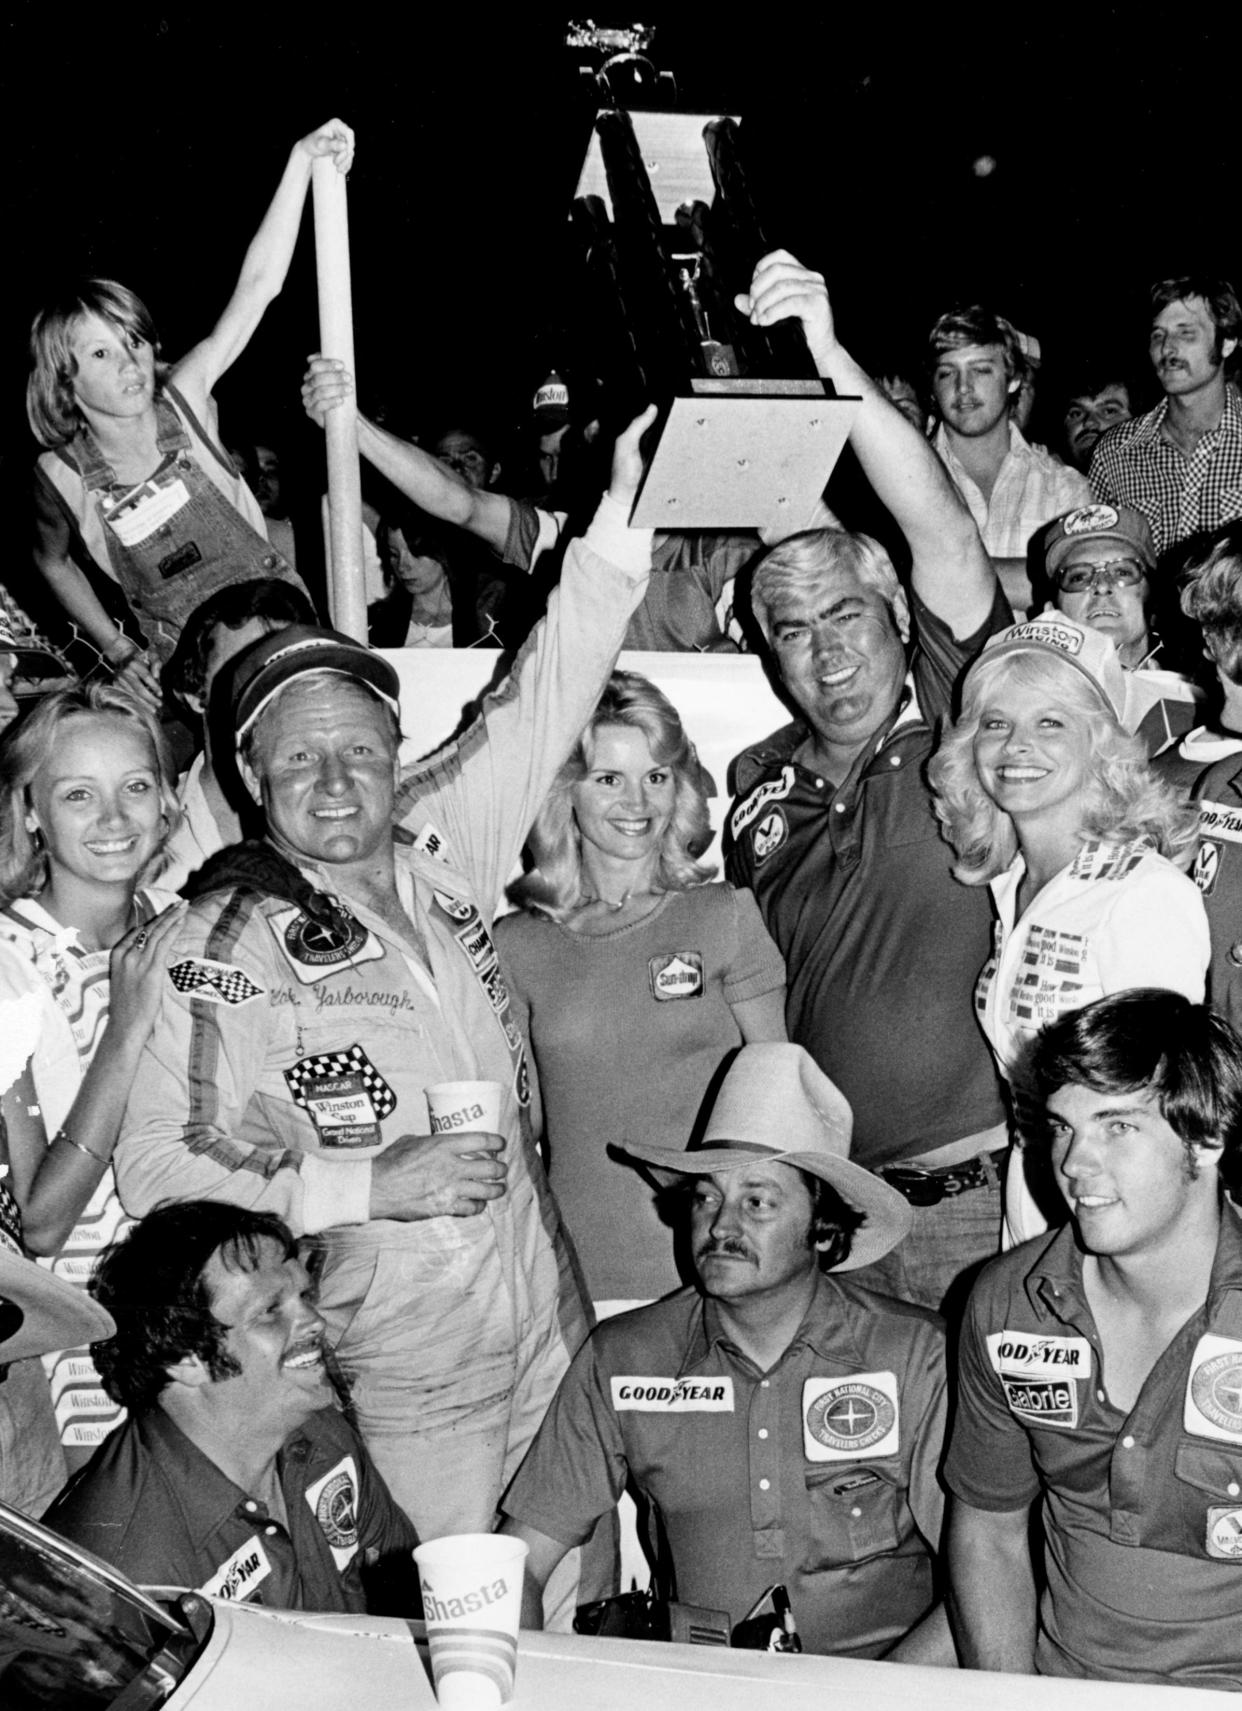 Driver Cale Yarborough, second from left, and car owner Junior Johnson, second from right, celebrates their victory in the Music City 420 before a near-record crowd of 21,500 at Nashville Speedway June 3, 1978. Yarborough became the only third diver in NASCAR Grand National history to lead a race from start to finish when he led every lap of the race.